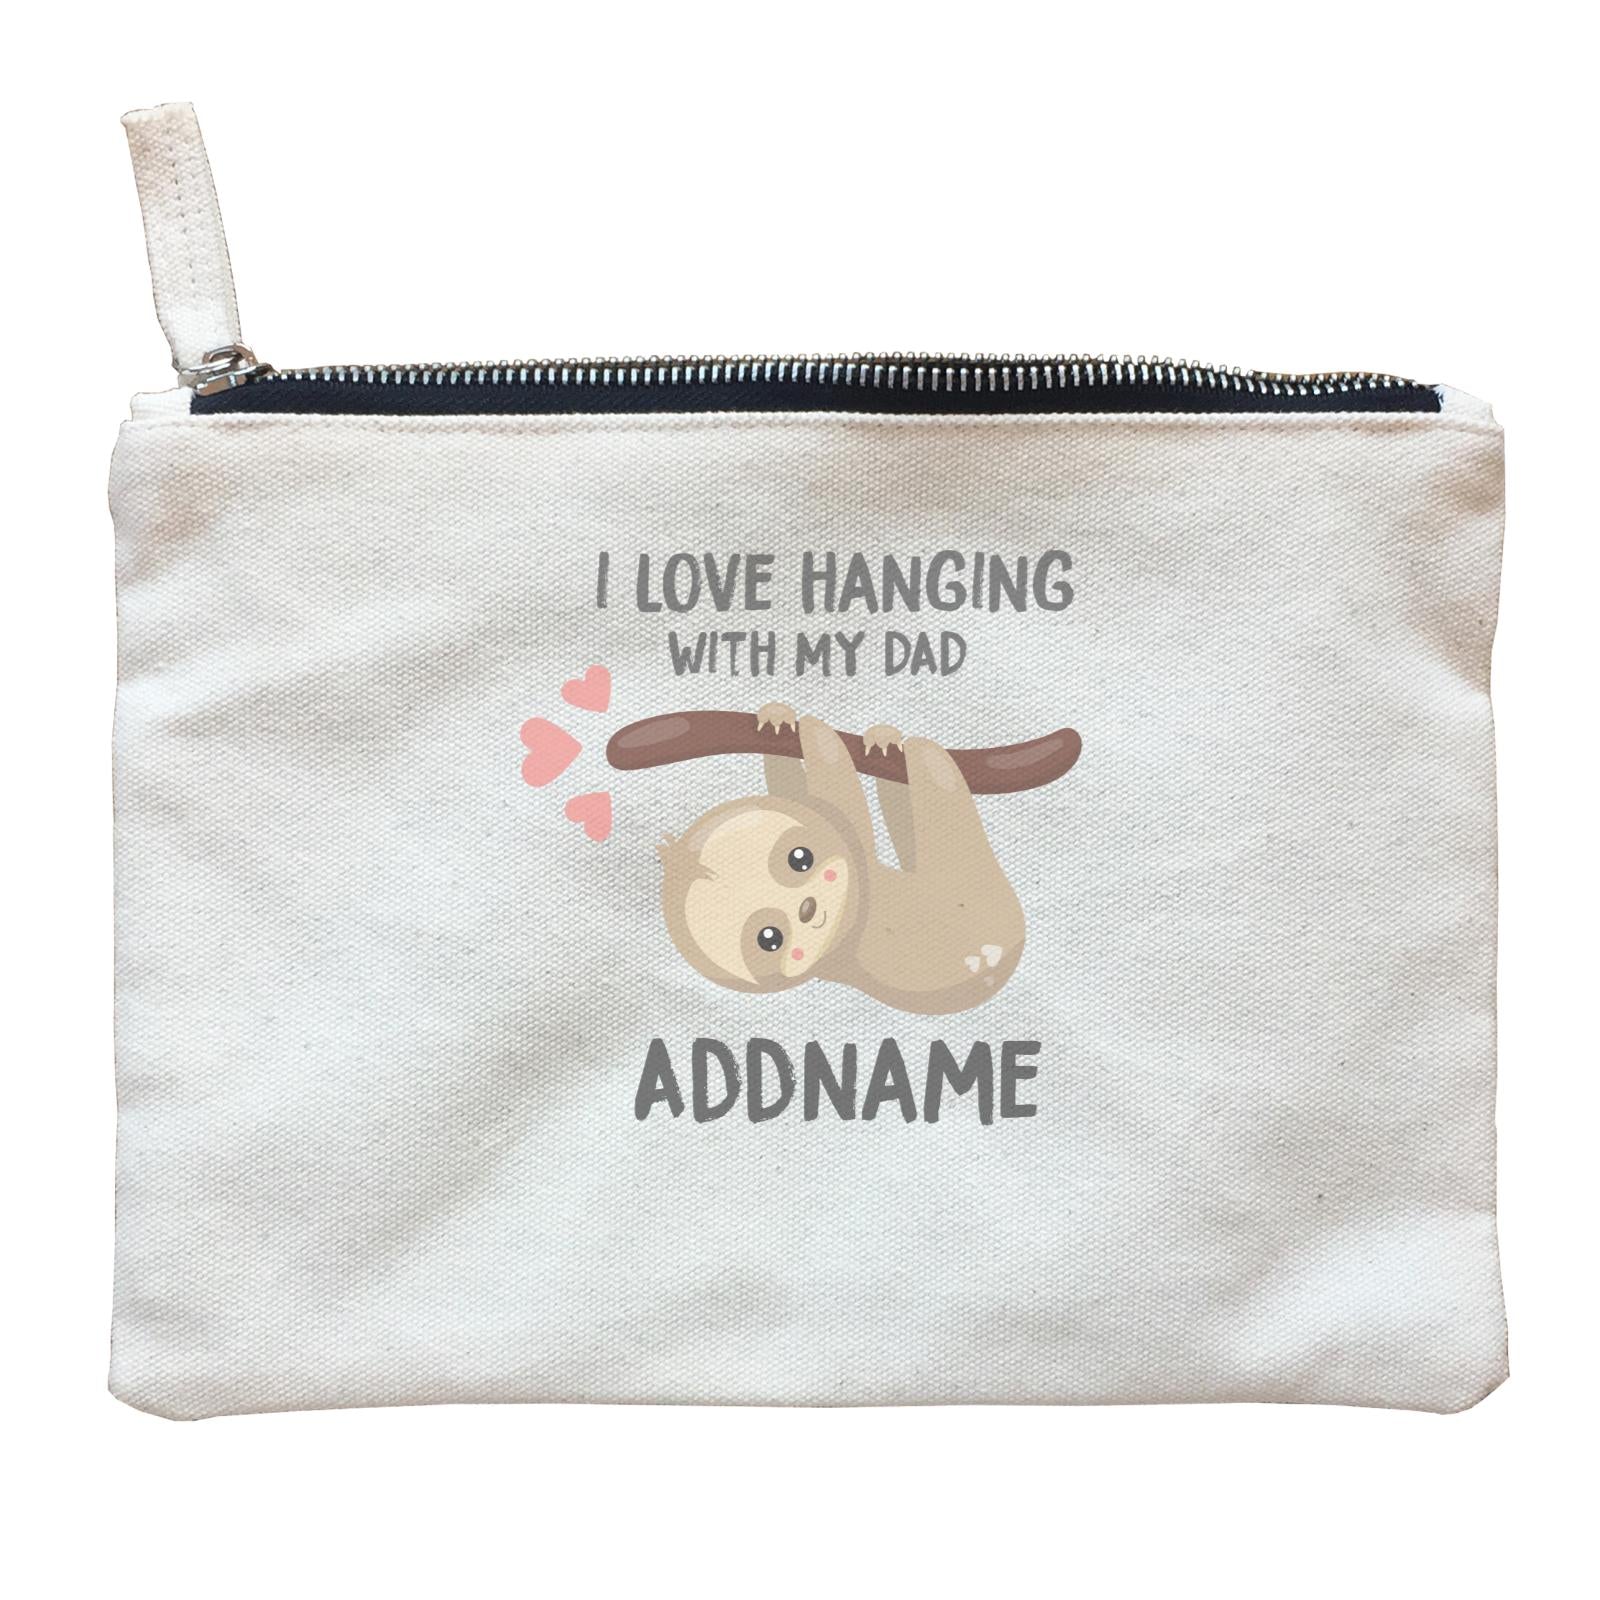 Cute Sloth I Love Hanging With My Dad Addname Zipper Pouch